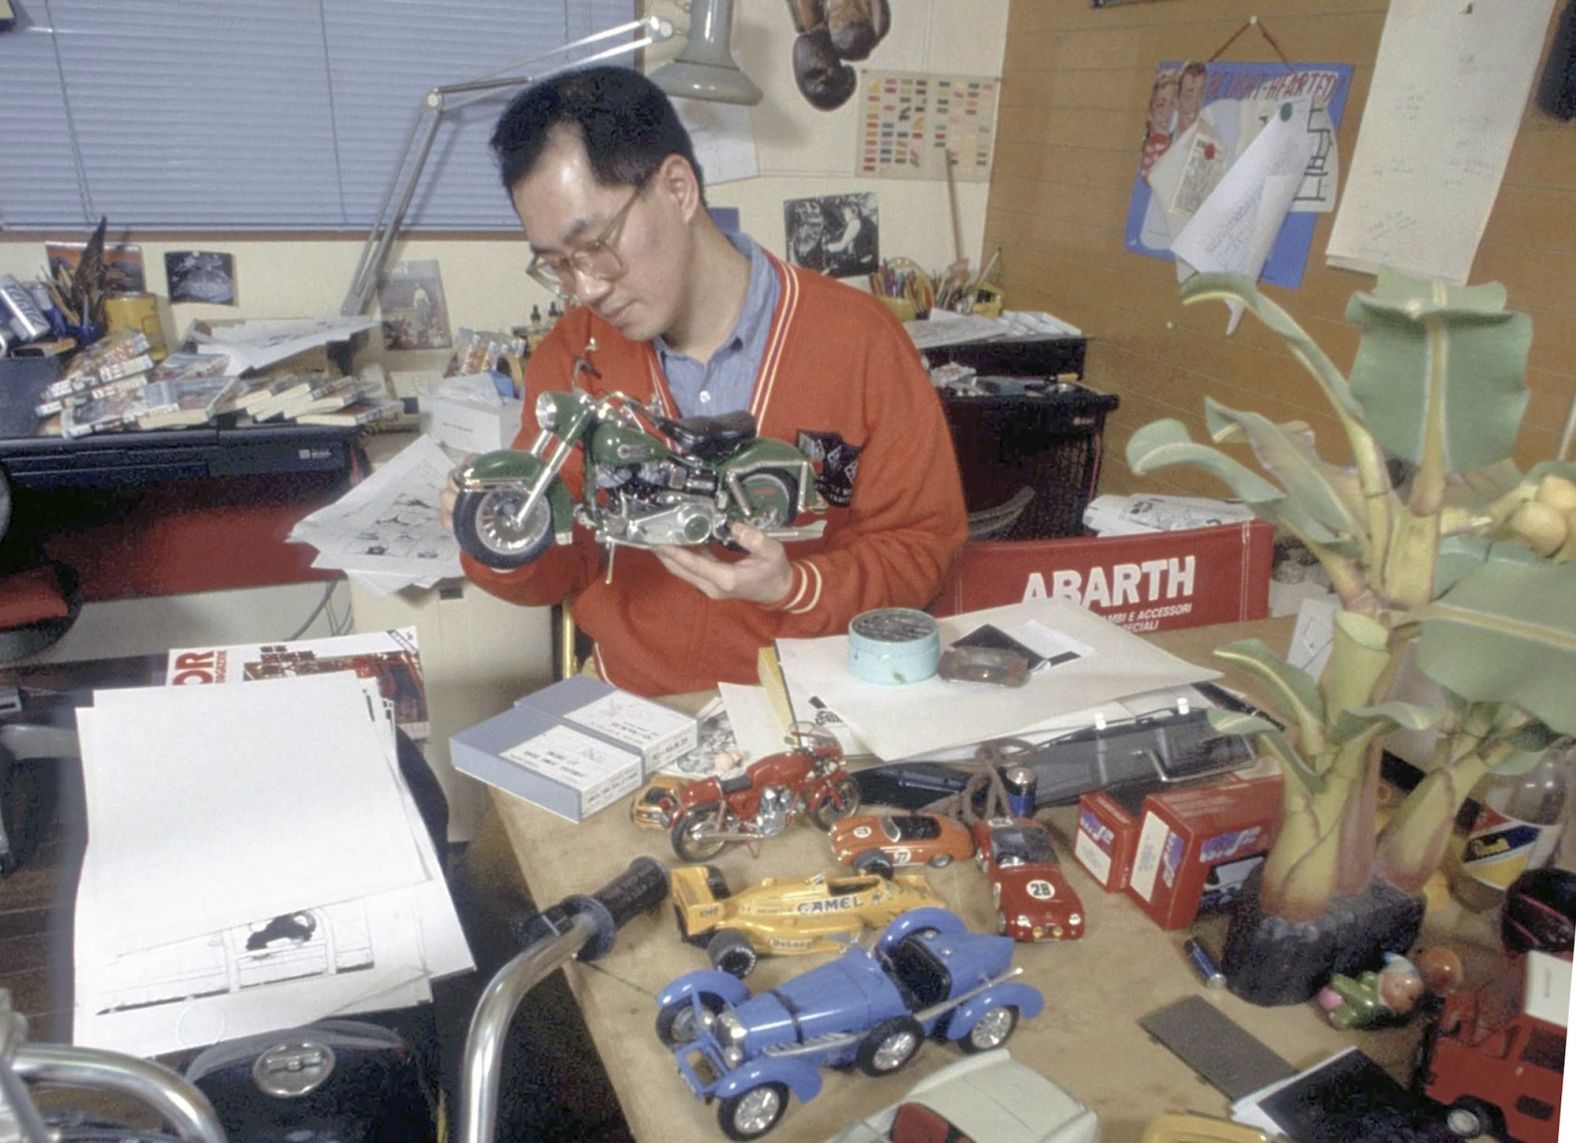 <a href="https://www.cnn.com/2024/03/08/asia/akira-toriyama-death-dragon-ball-japan-intl-hnk/index.html" target="_blank">Akira Toriyama</a>, the Japanse manga artist who created the enormously popular and influential "Dragon Ball" series, died of a brain condition at the age of 68, his production studio said on March 8.